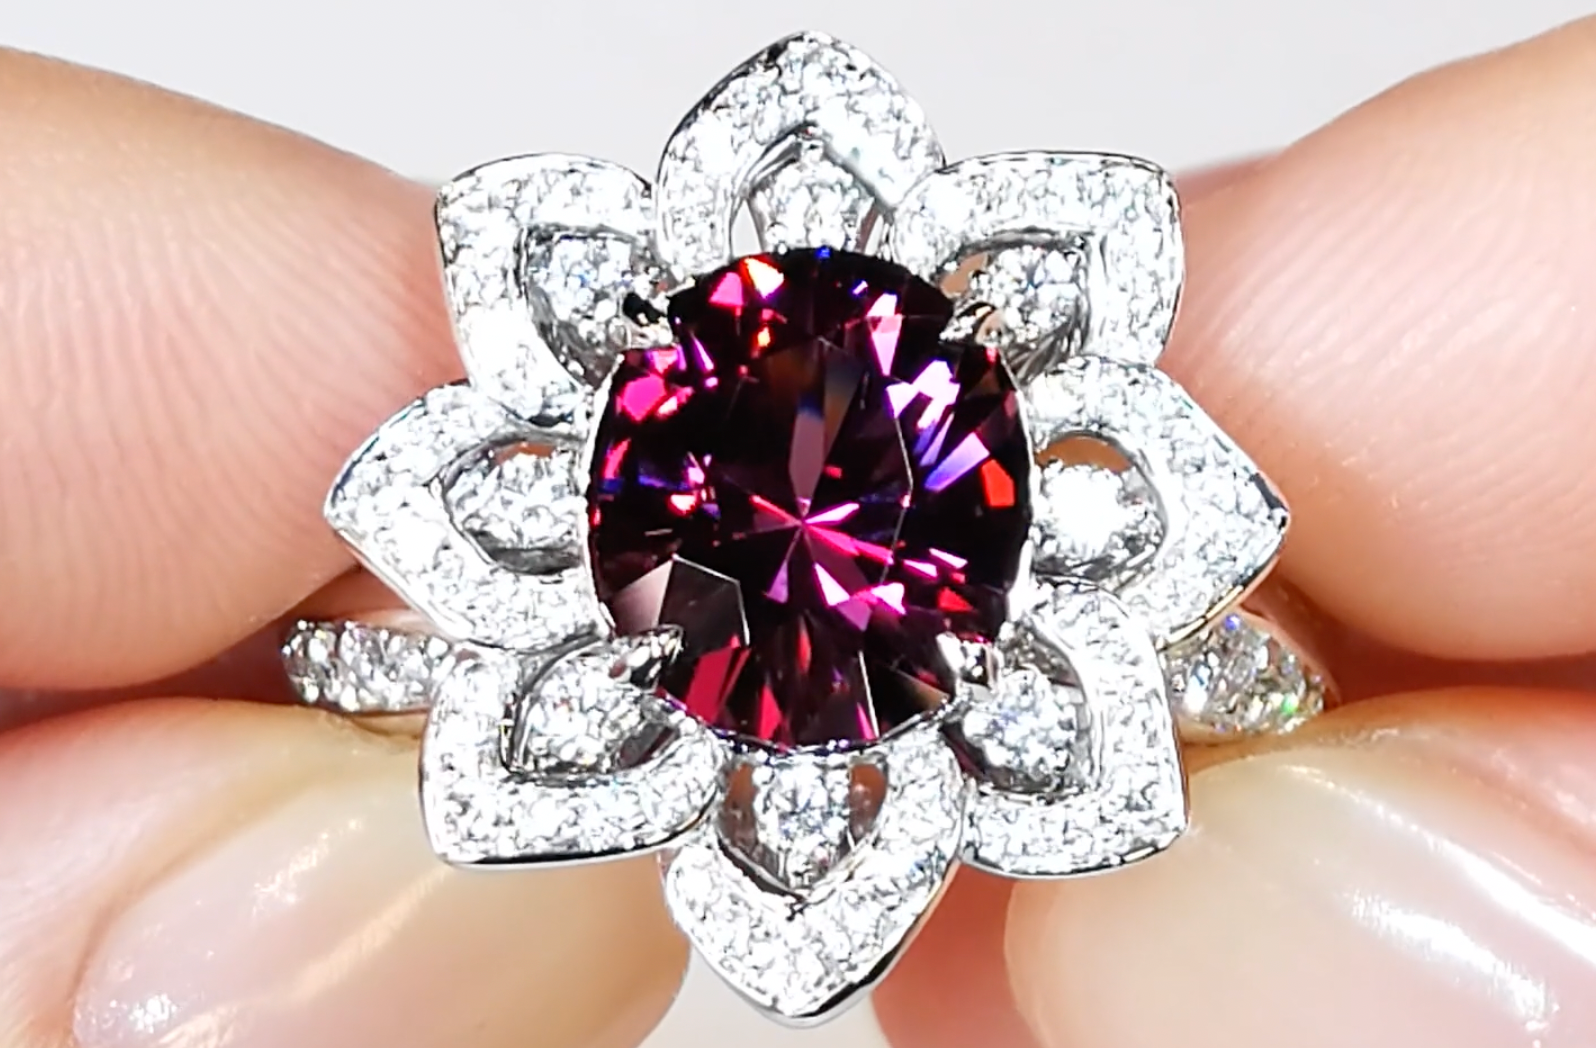 4.13ct Magenta Garnet Ring with D Flawless Diamonds set in 18K White Gold